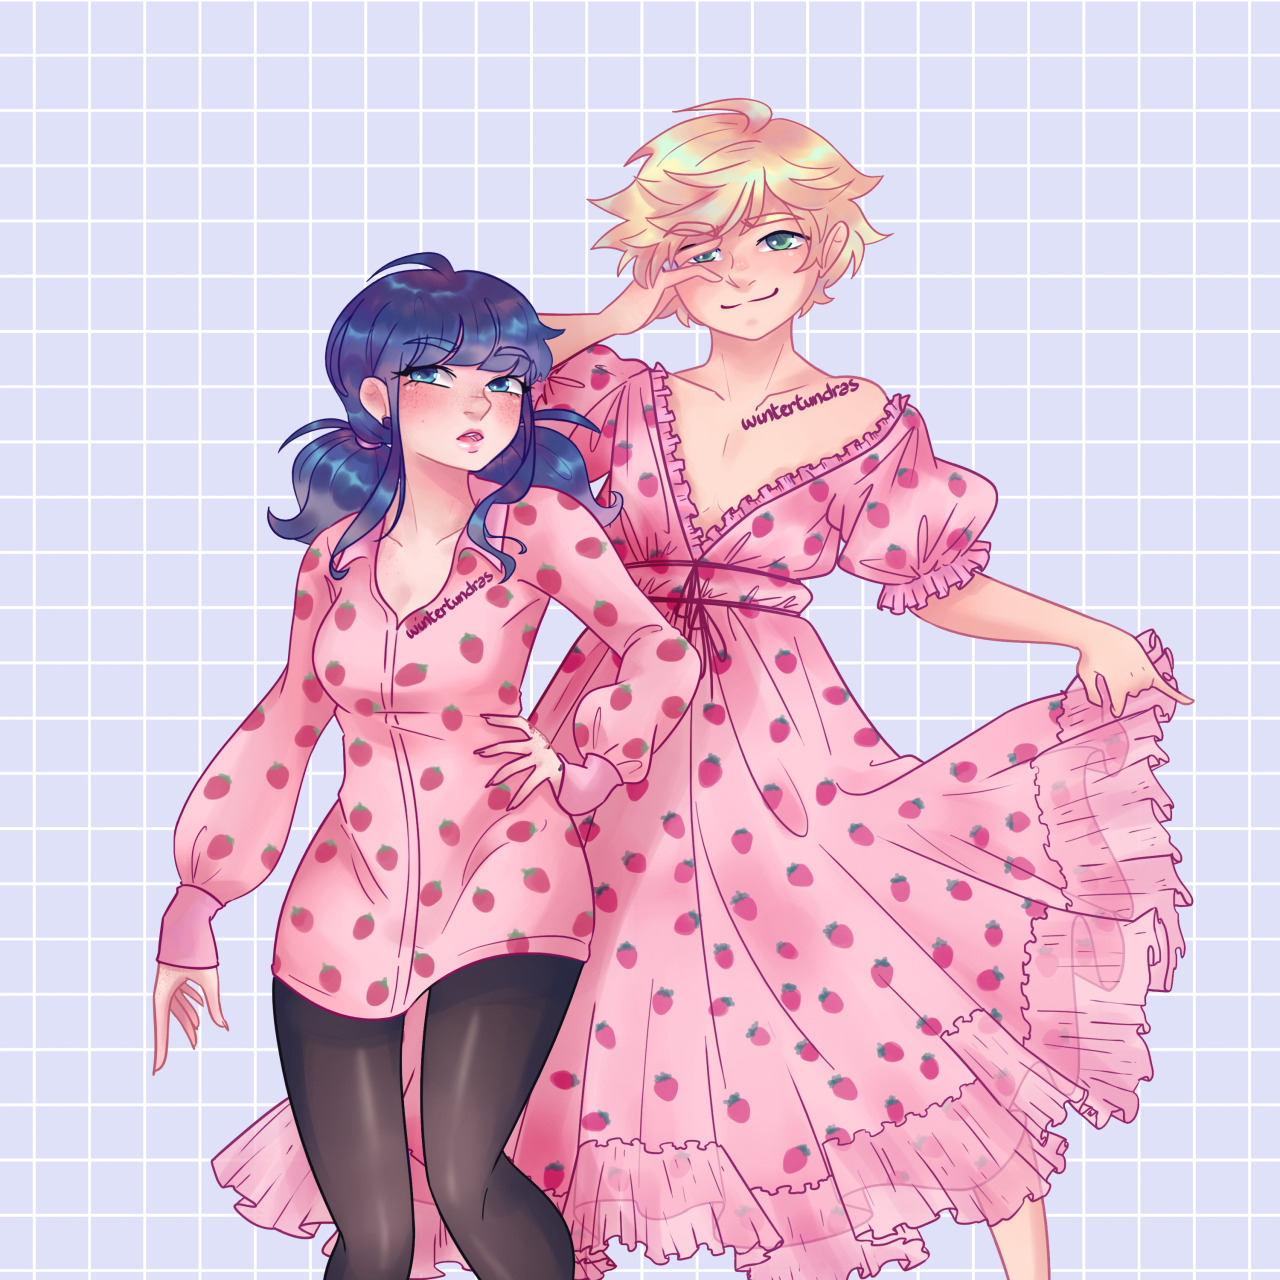 Marinette holding a giant cupcake with a strawberry on top from